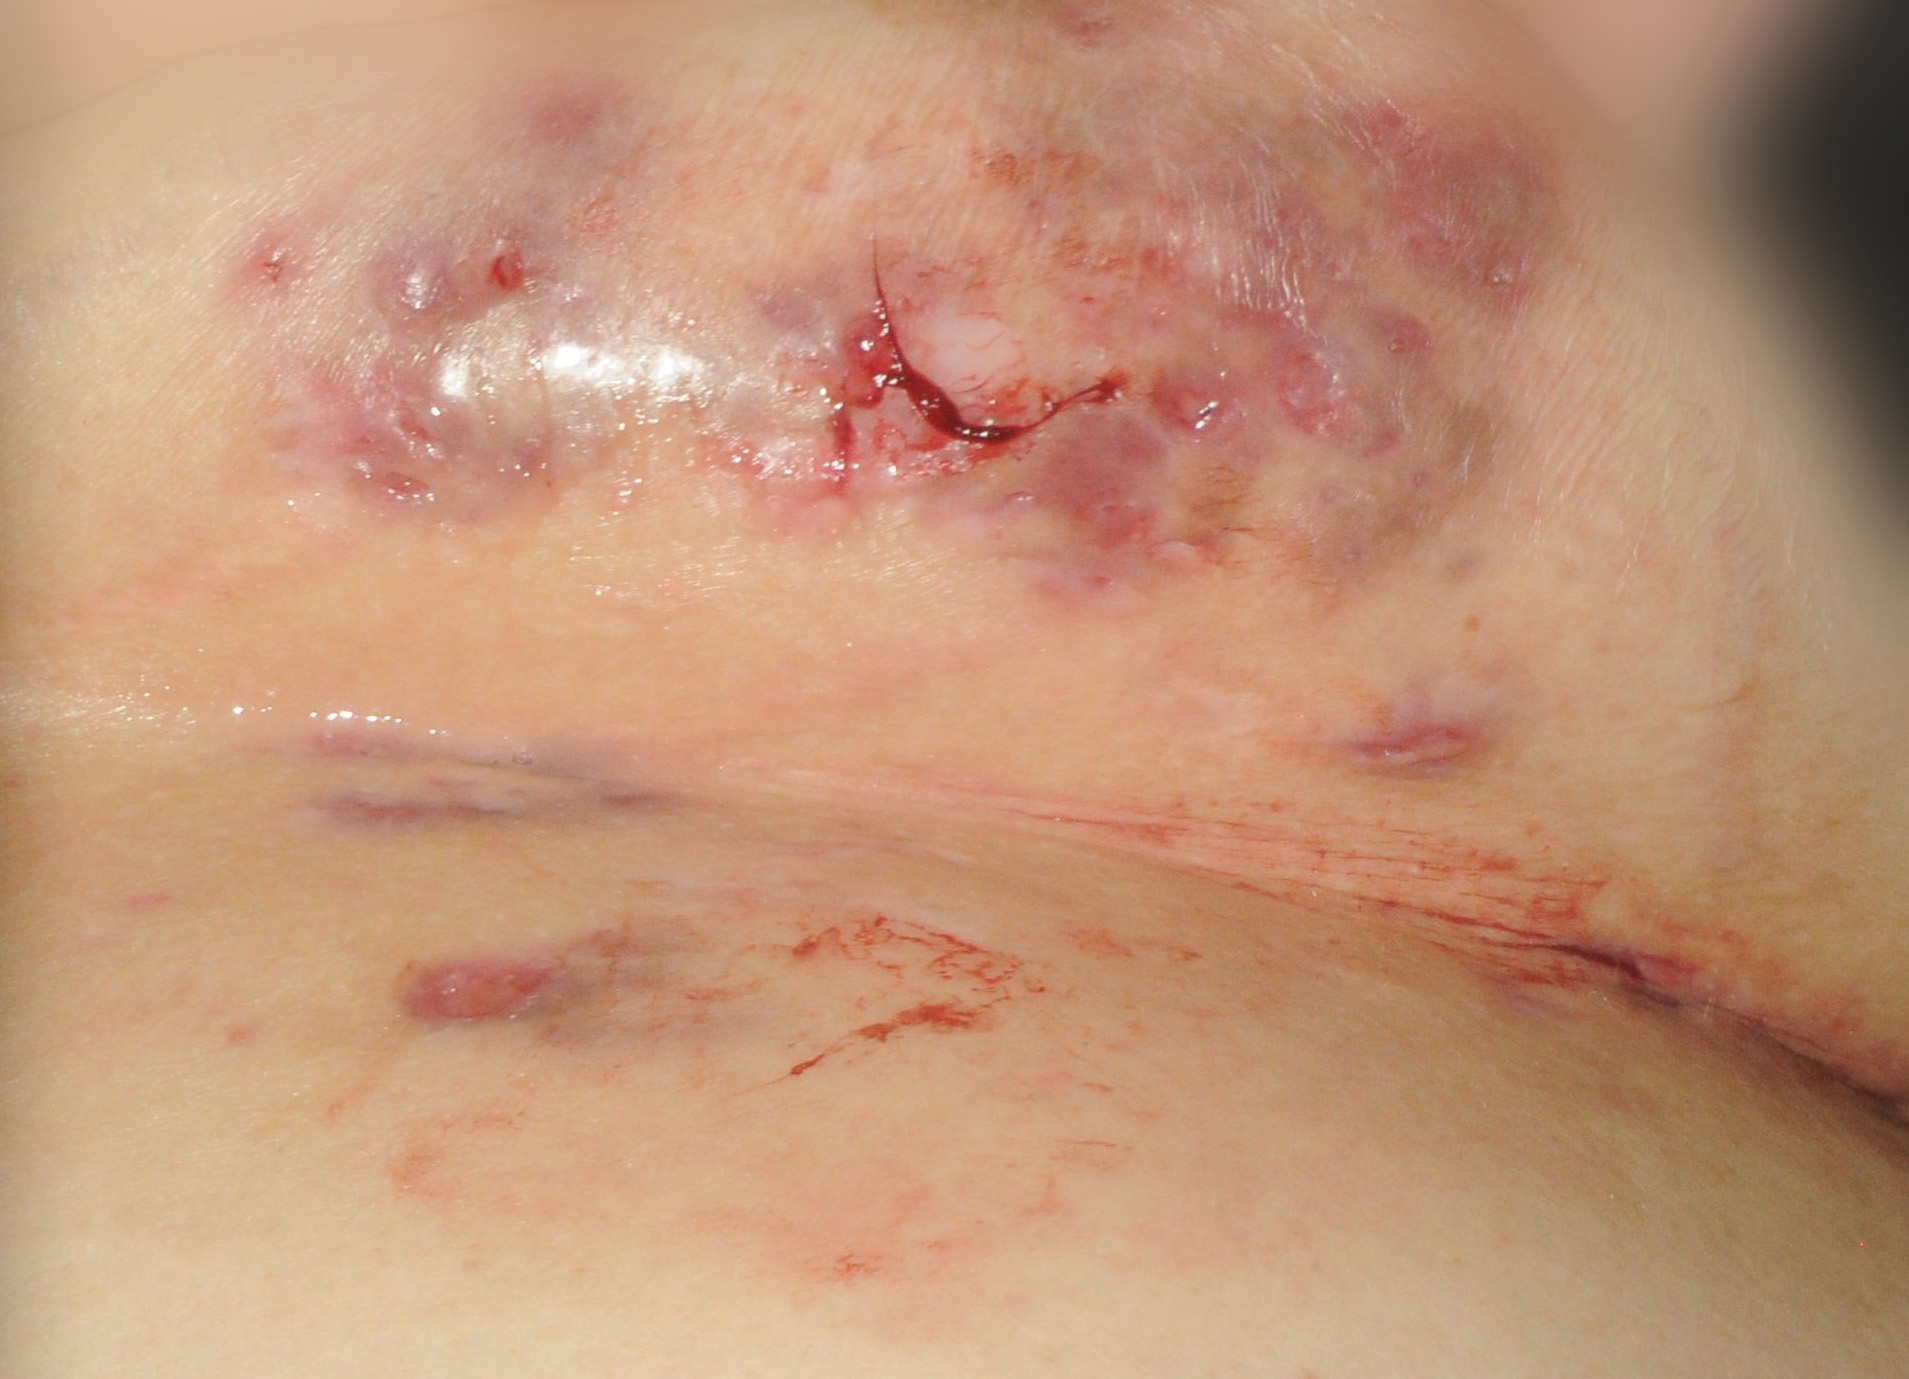 Severe Case of Hidradenitis Suppurativa Located on the Breast of a Female Patient